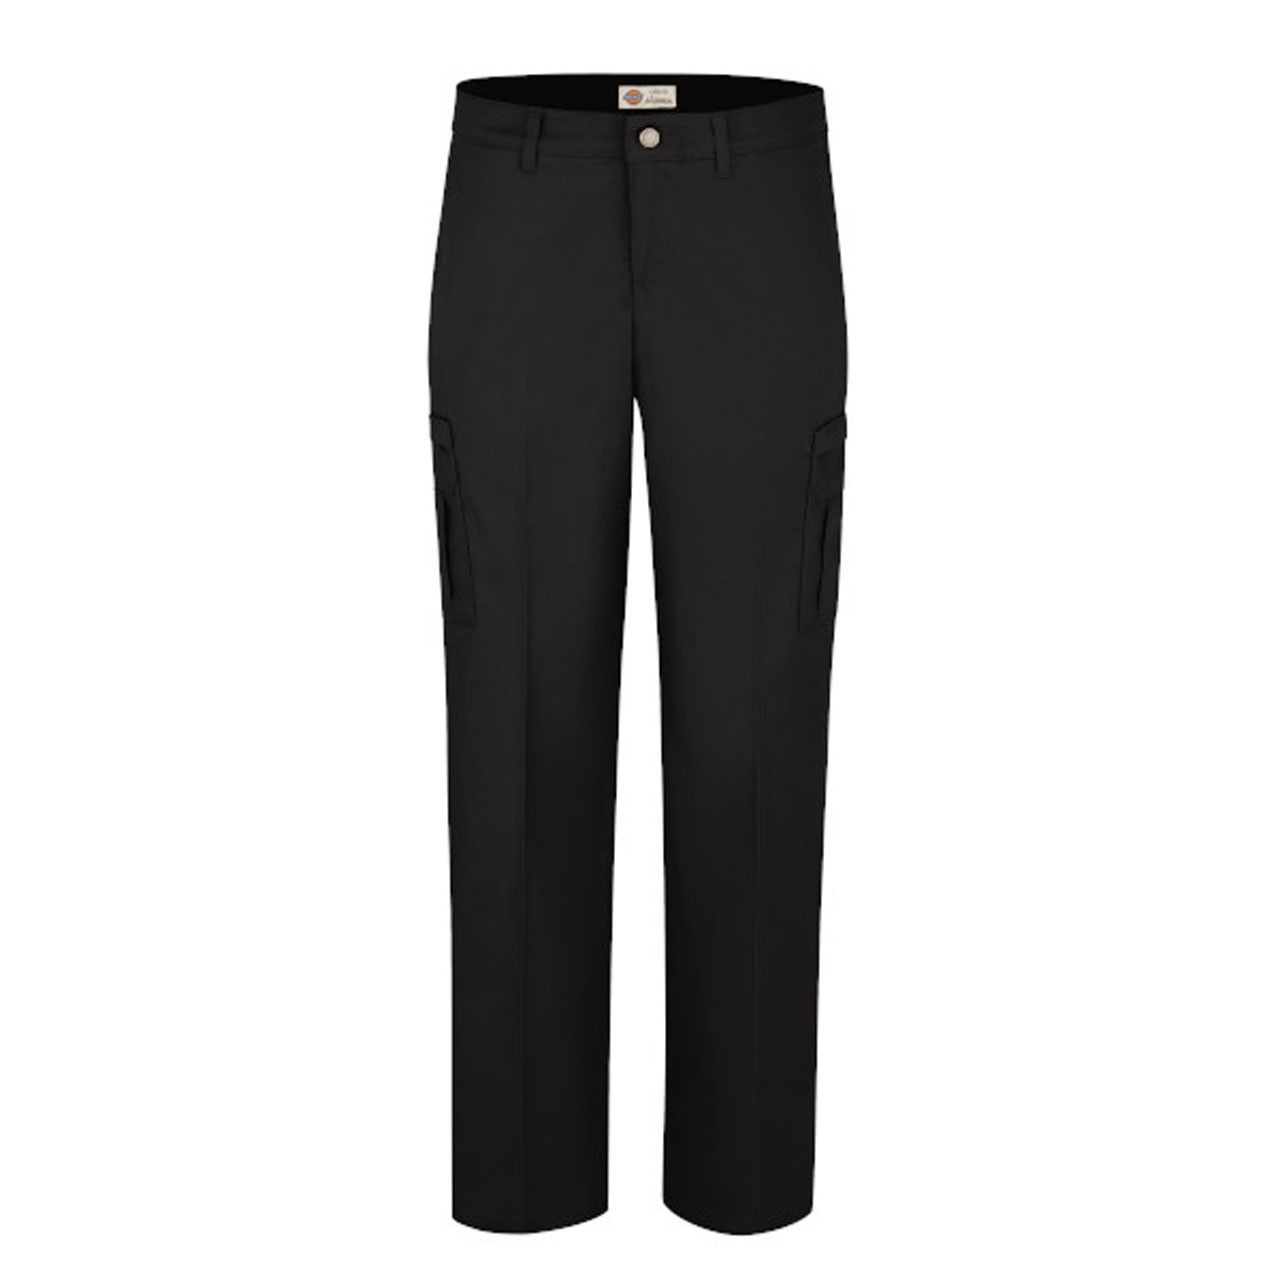 Does the waistband of the black Dickies cargo pants have a specific type?